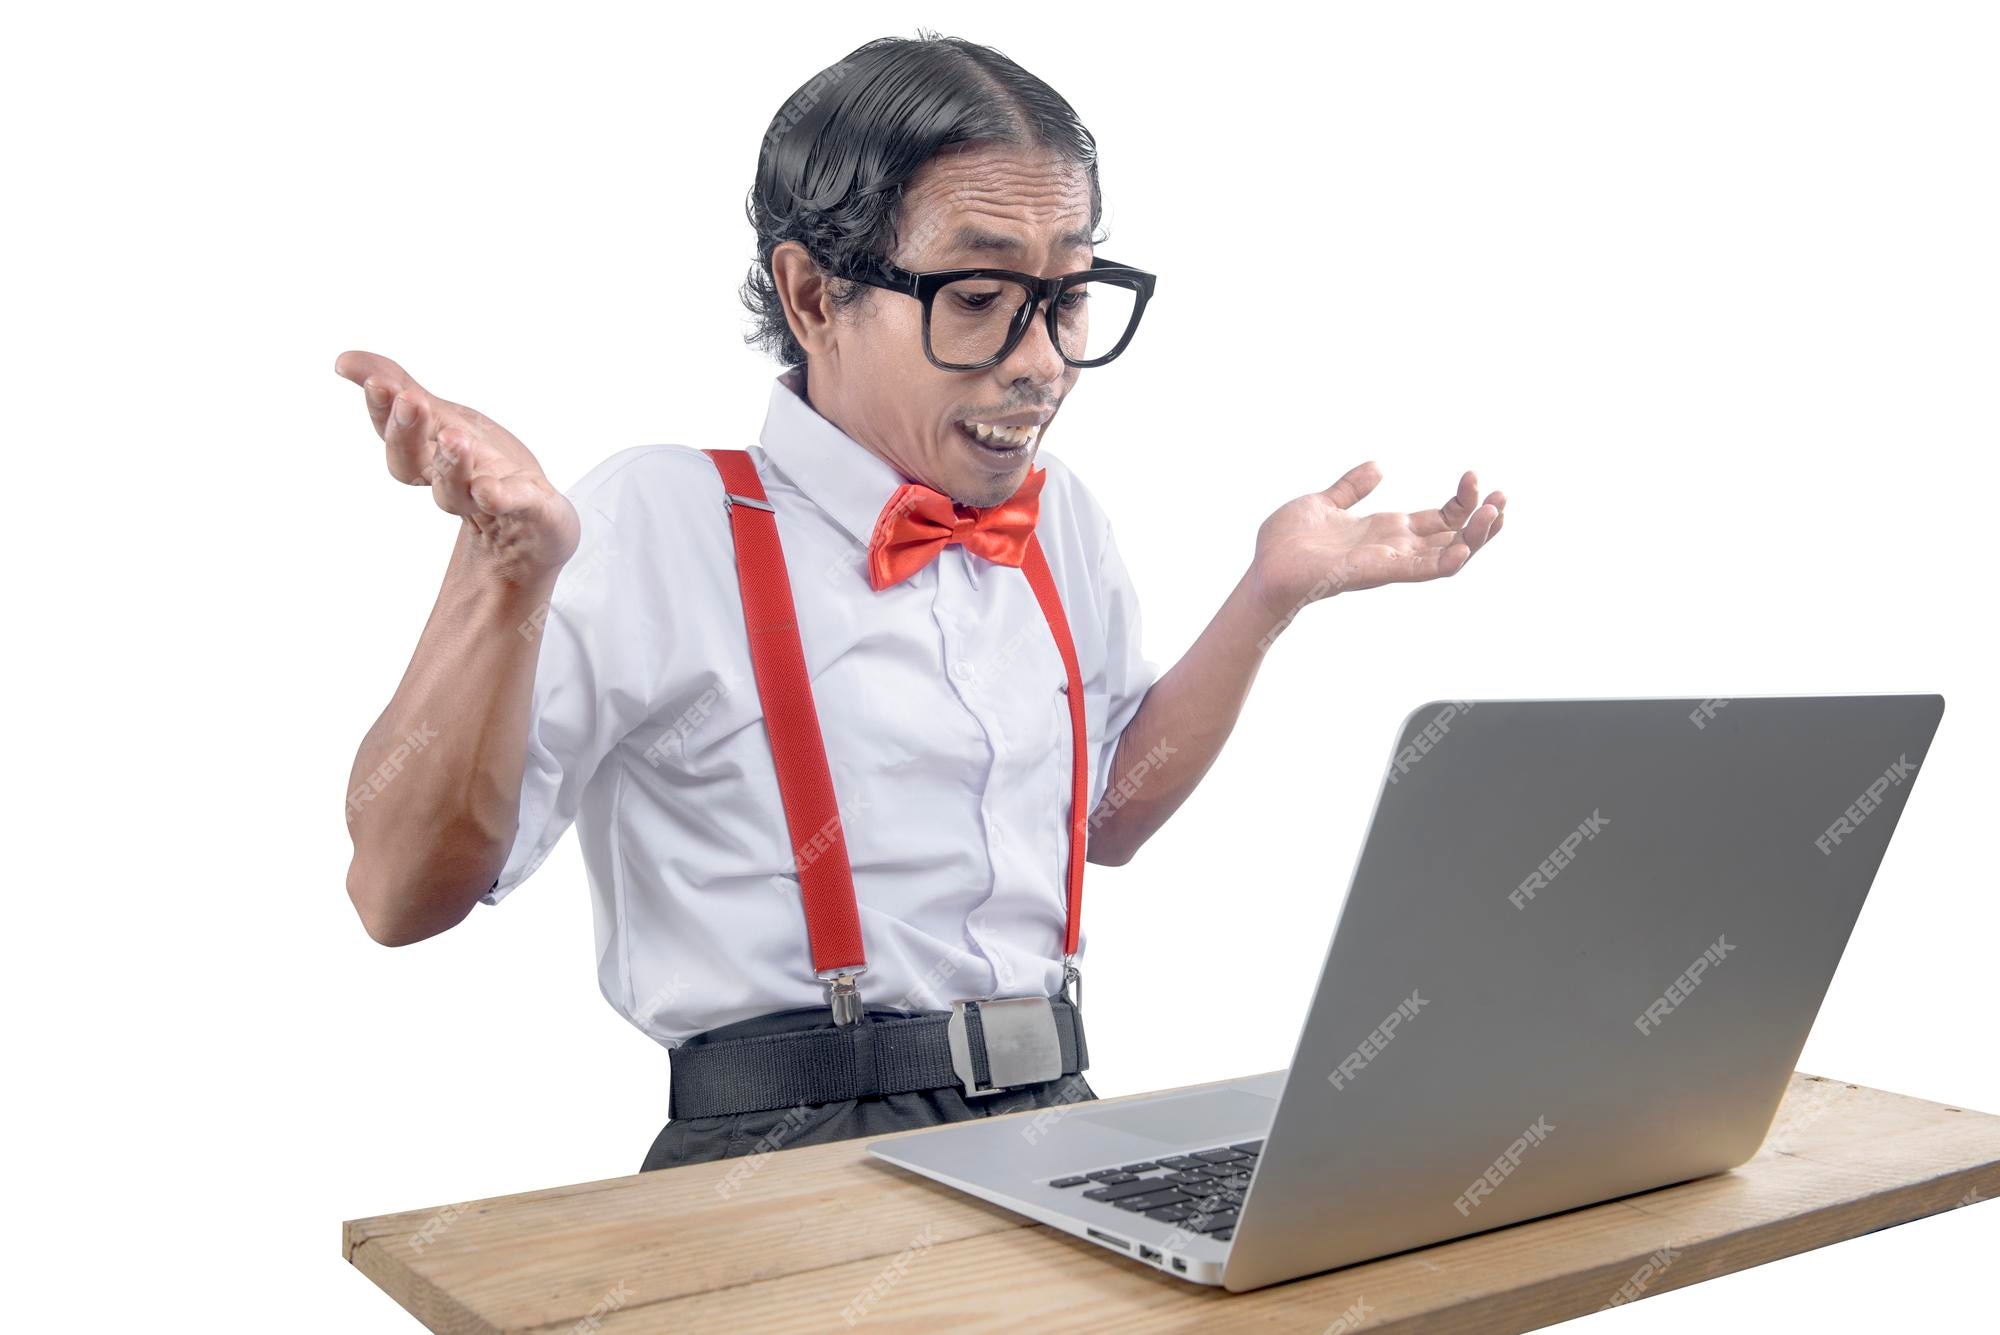 asian-nerd-with-ugly-face-using-laptop-isolated-white-background_9083-9662.jpg